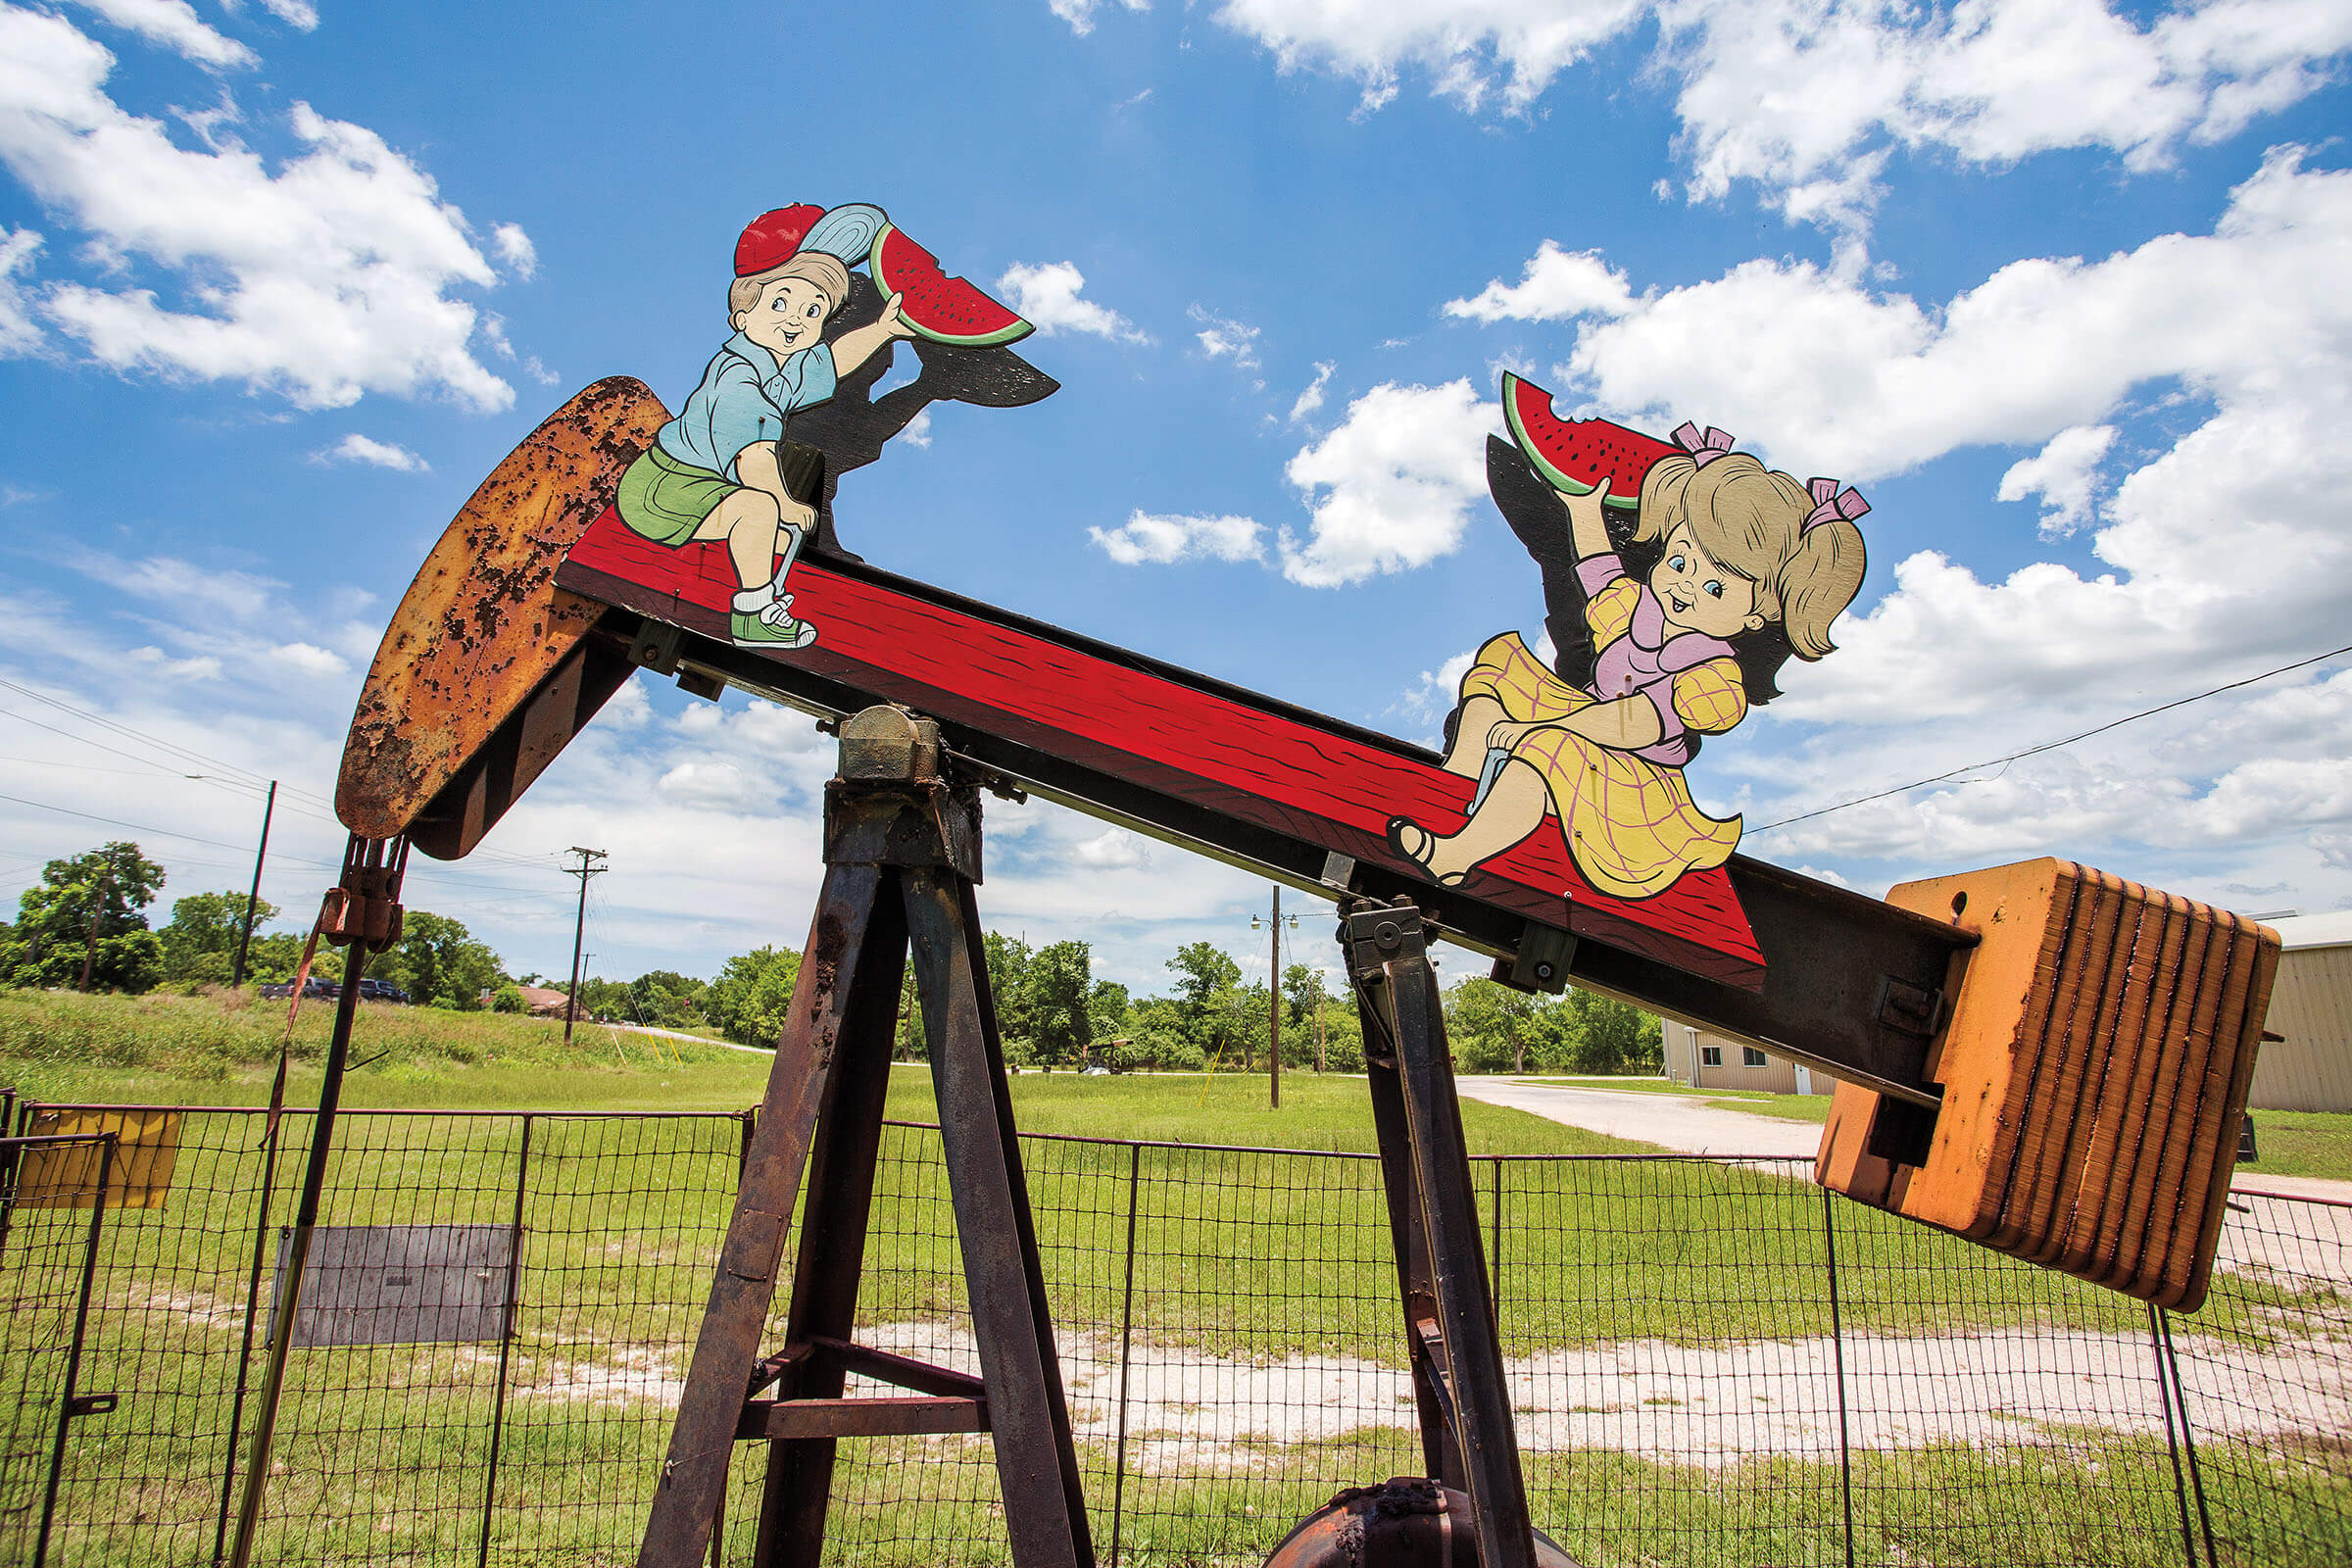 A decorated pump jack where two children eating watermelon play like the pump jack is a seesaw